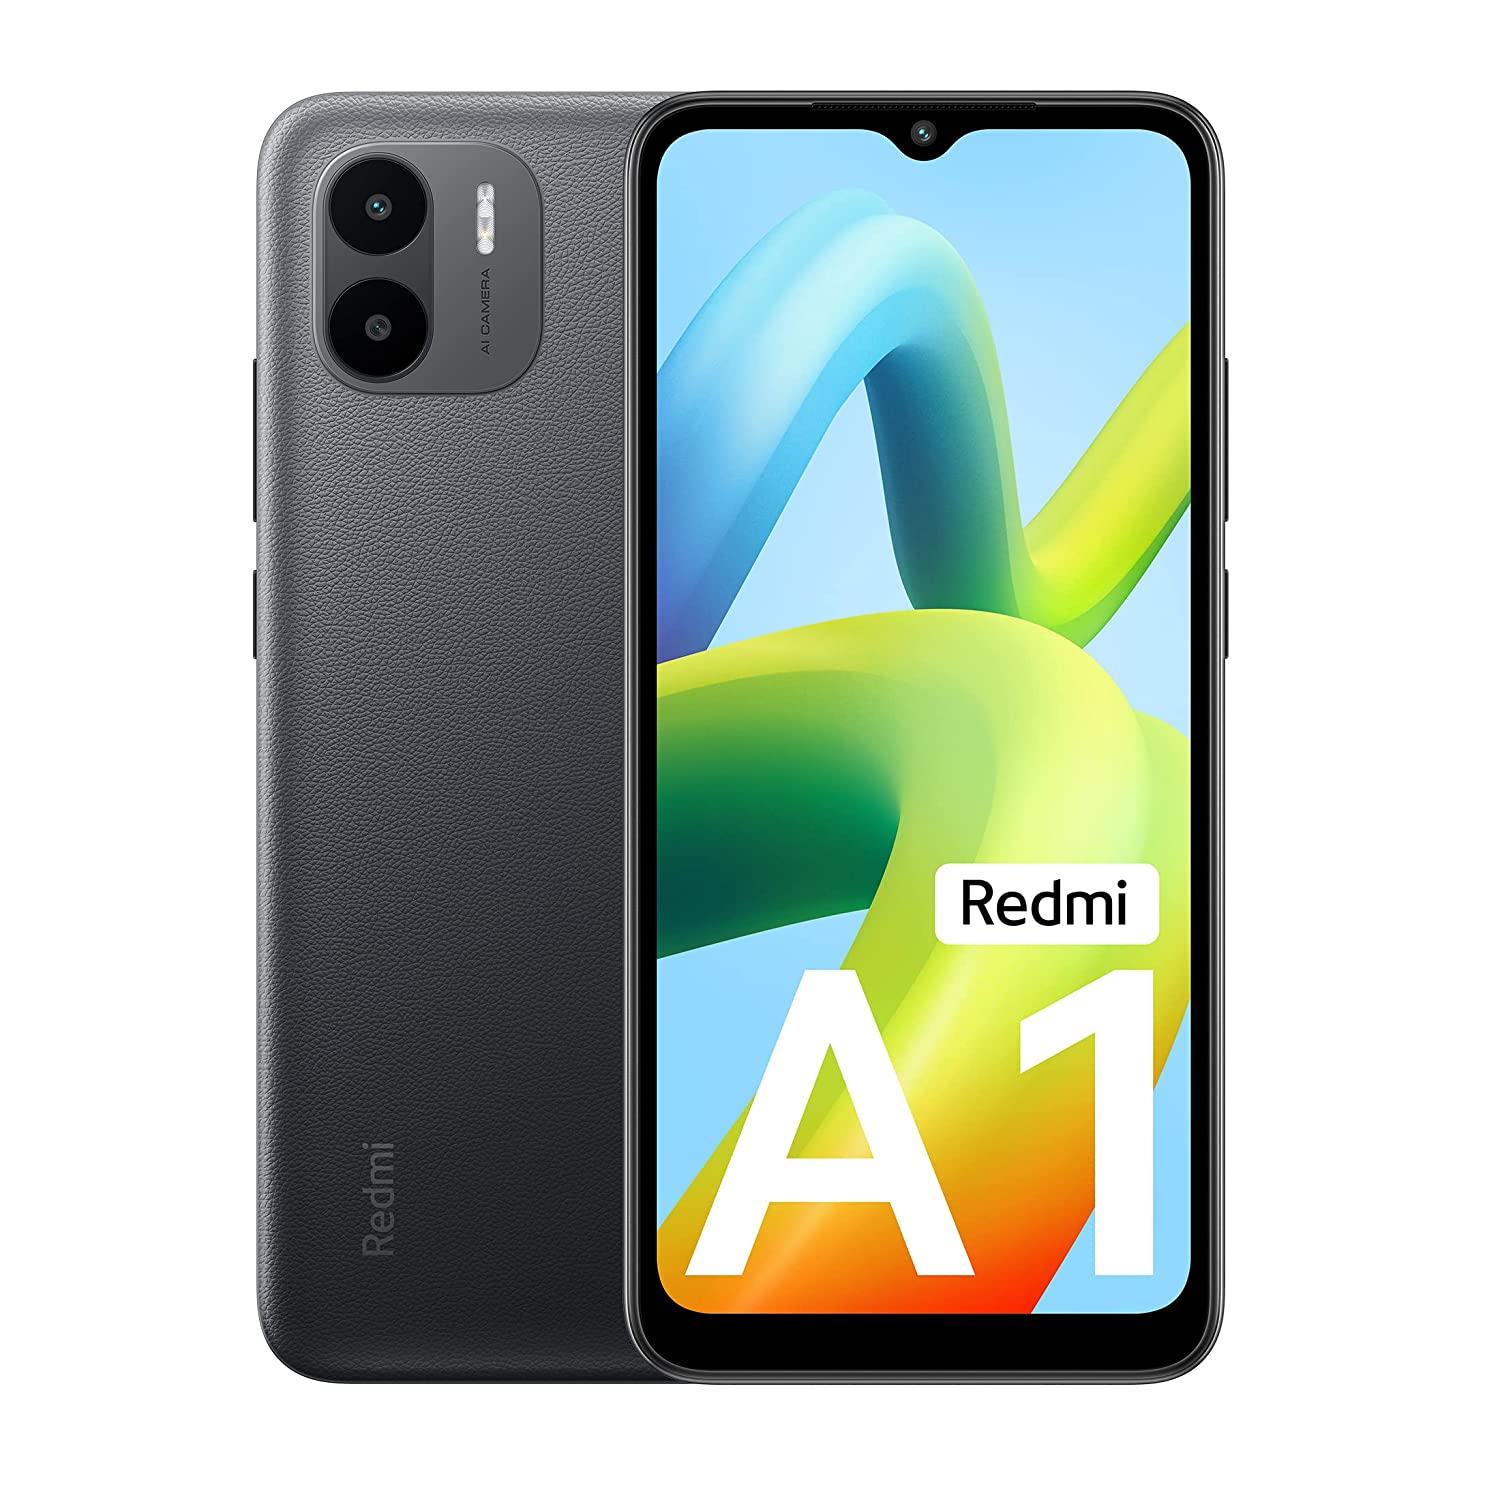 Redmi A1 Helio A22 | 5000 mAh Battery | 8MP AI Dual Cam | Leather Texture Design | Android 12 | Free Earphones on Checkout